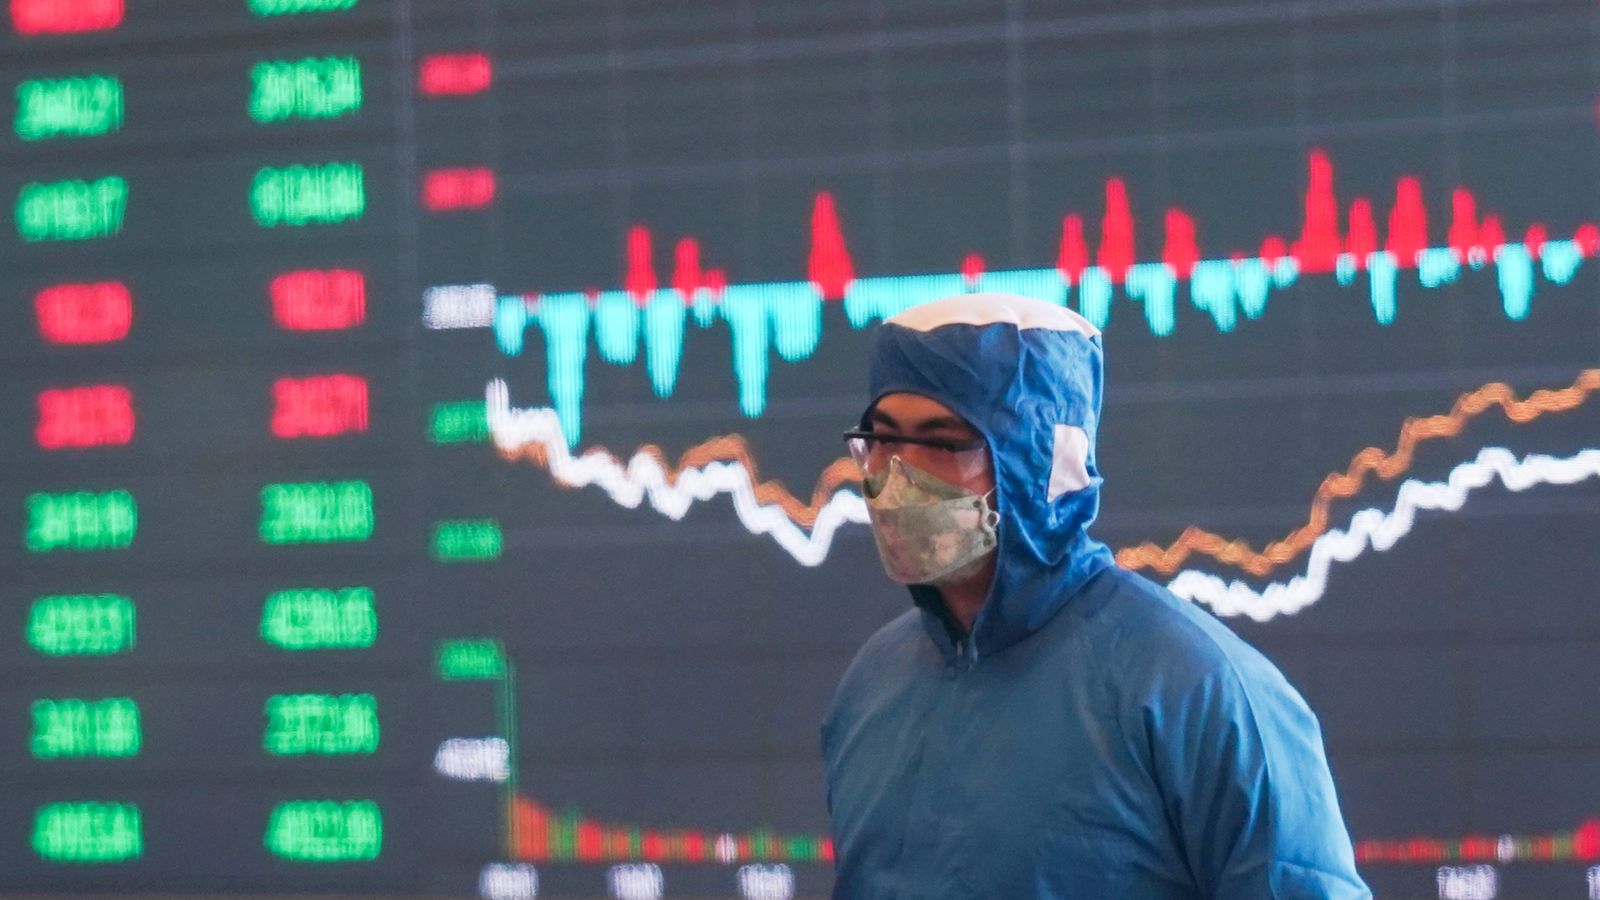 Coronavirus: Stocks surge globally after biggest daily rise since 2015 in China